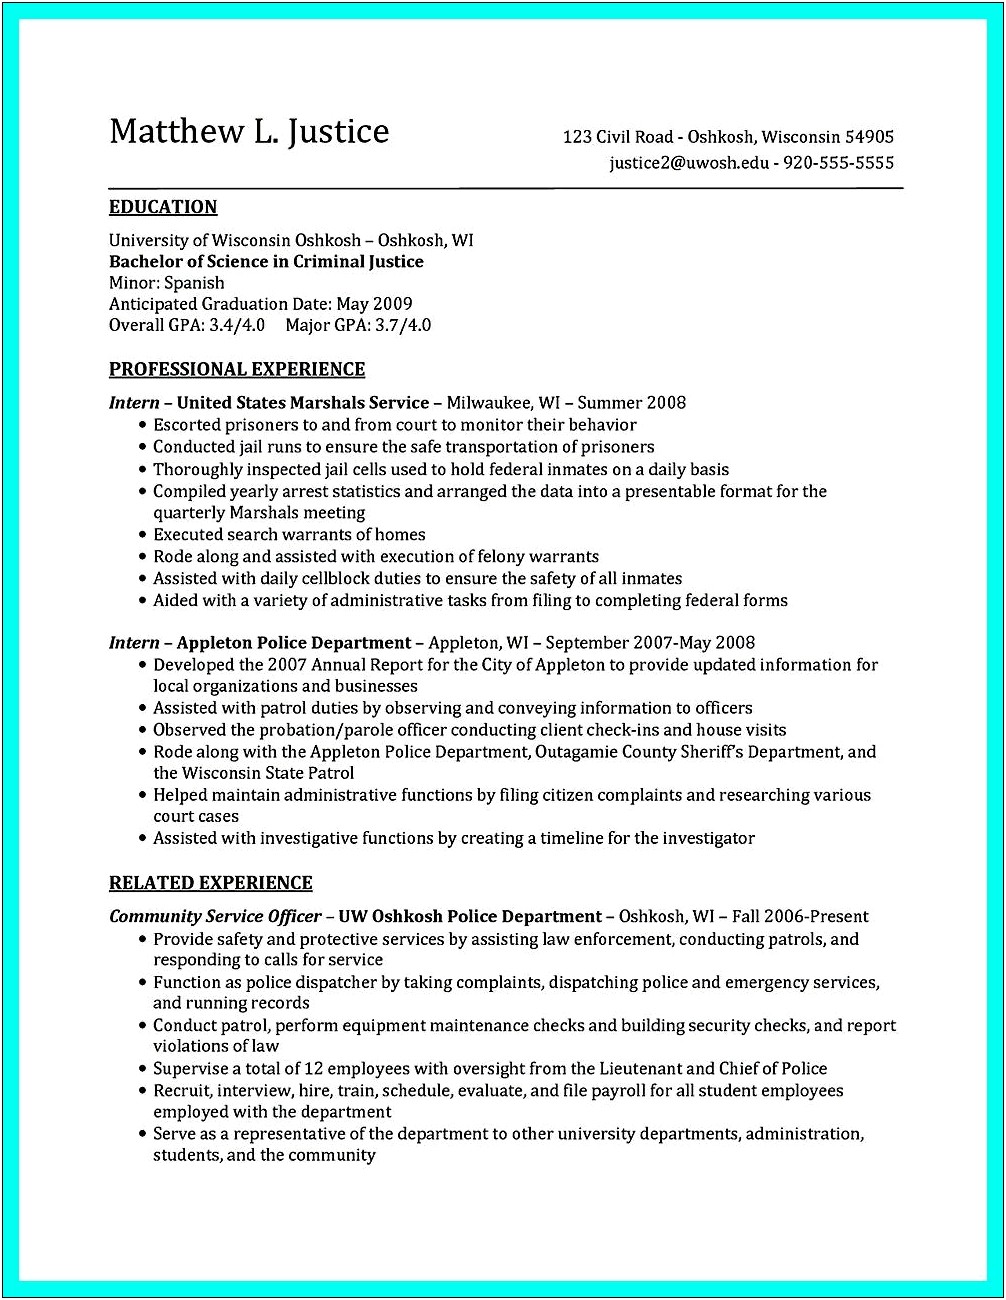 Professional Summary For Criminal Justice Resume